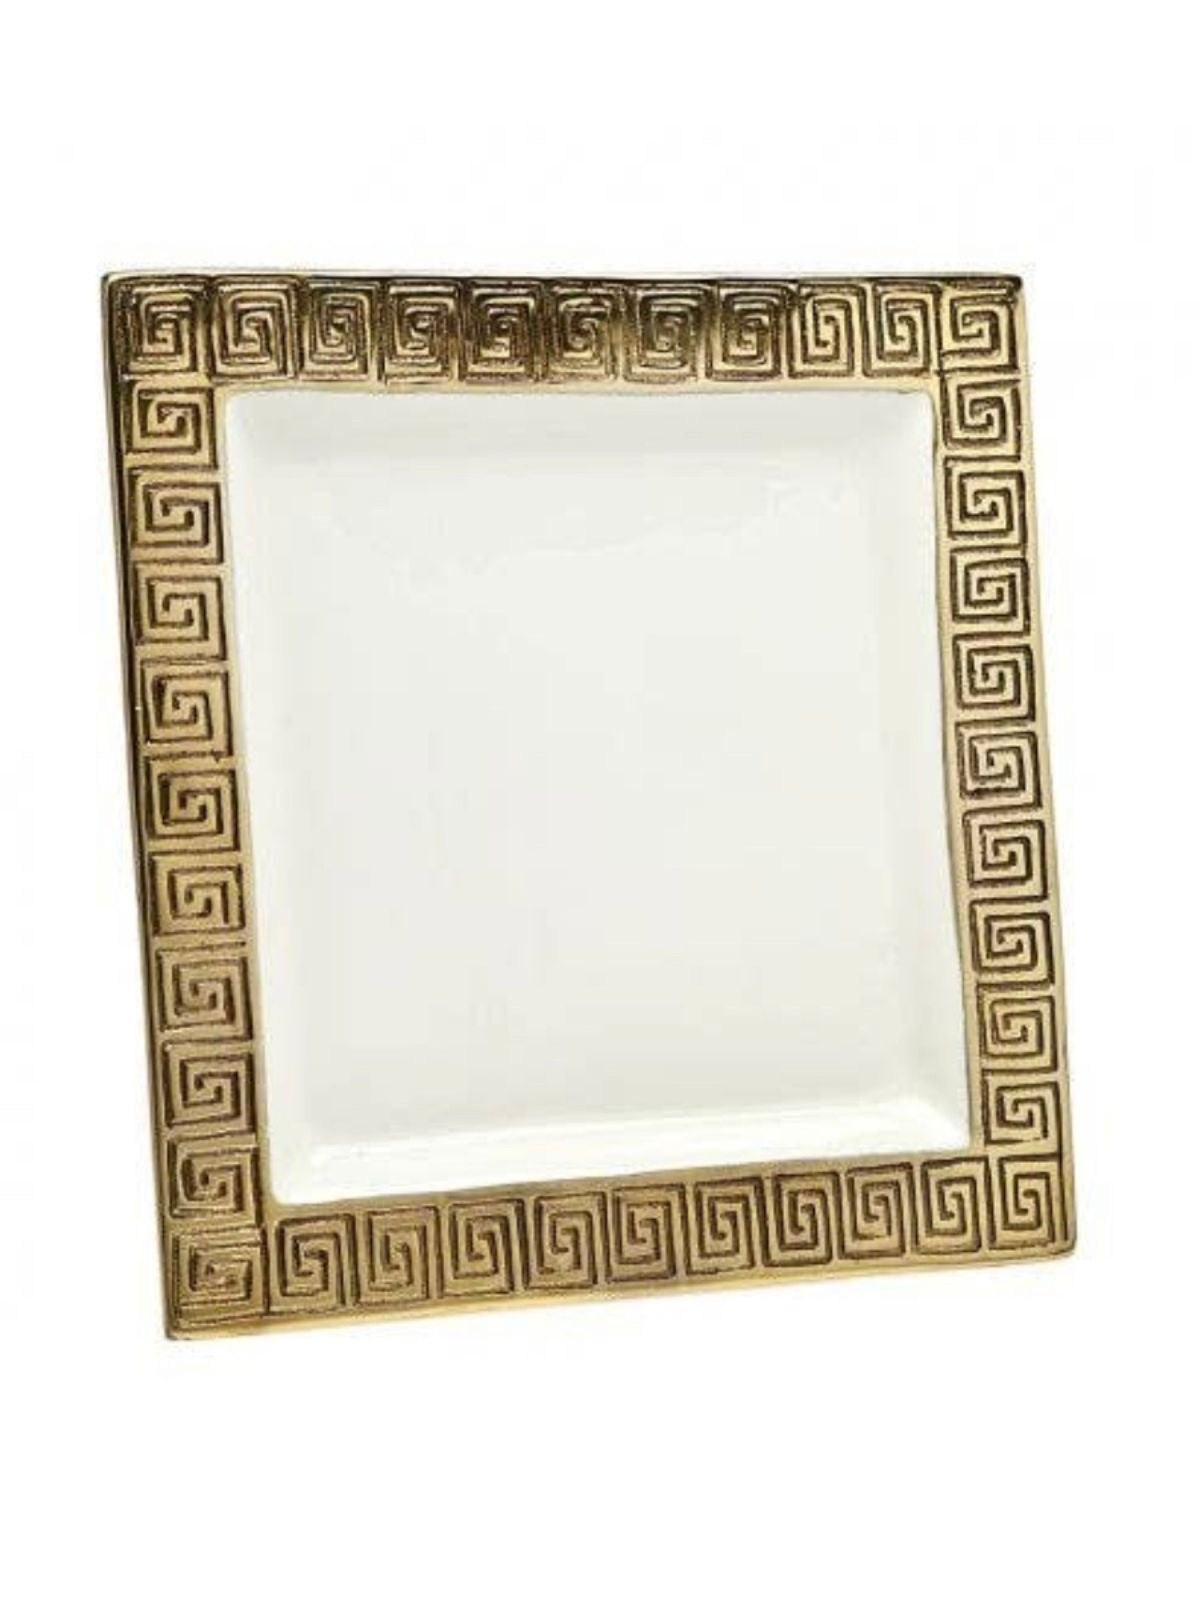 15 inch Squared White Ceramic Serving Tray with Luxurious Gold Greek Key Pattern.